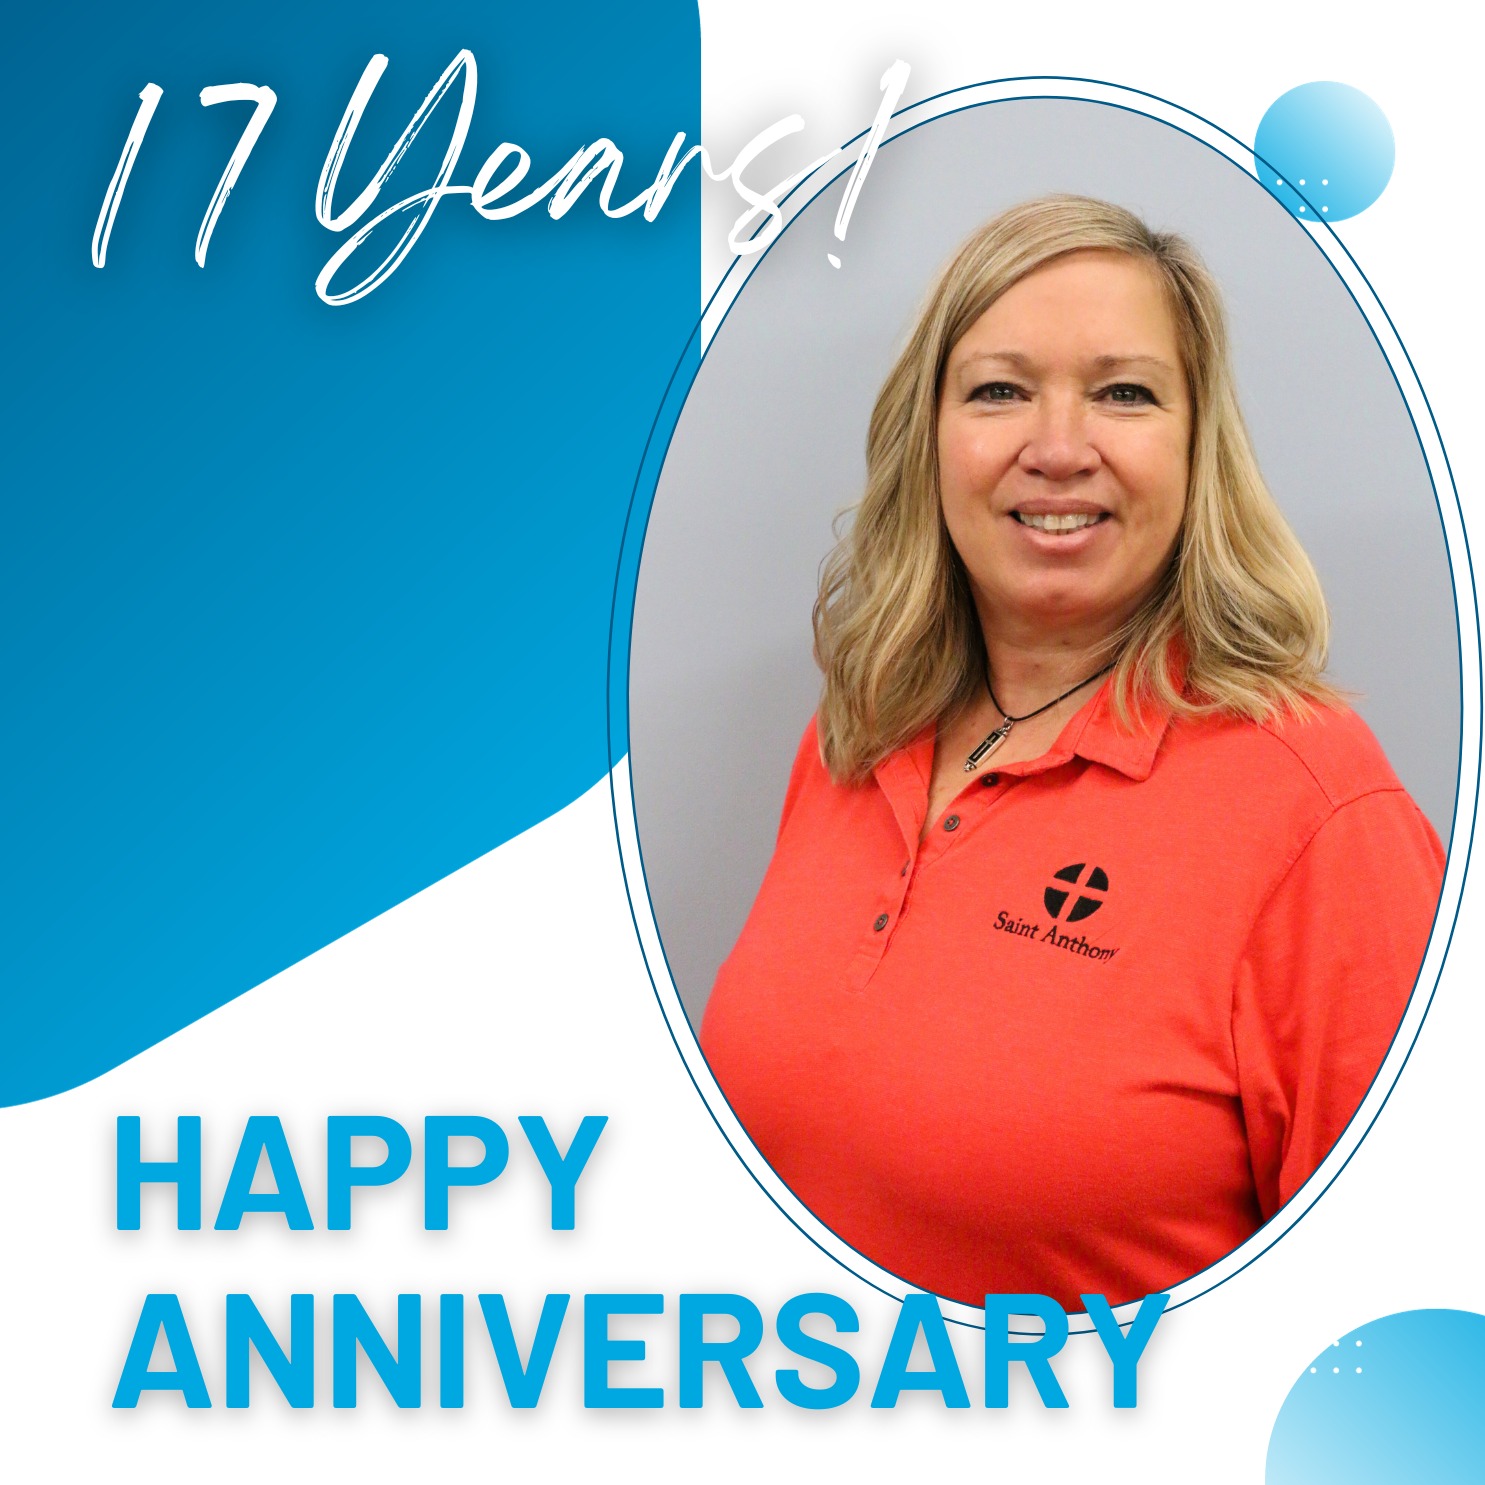 🎉✨ Celebrating 17 Years of Excellence! 🎊 Today, we extend our heartfelt congratulations to Chalone Robbins, our  Activities Director. Chalone has brought joy, creativity, and passion to our community, making every day special for our residents. 🌟